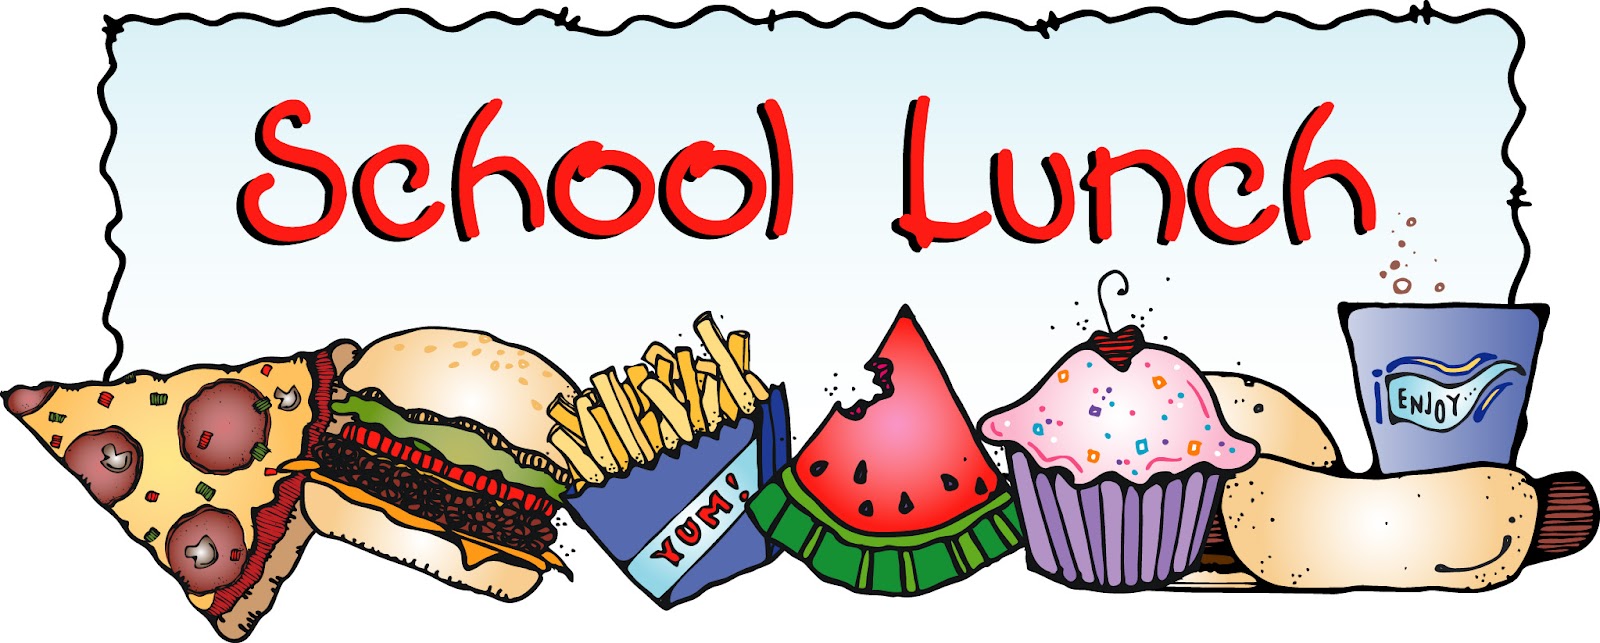 Lunch clipart 6 - School Lunch Clipart